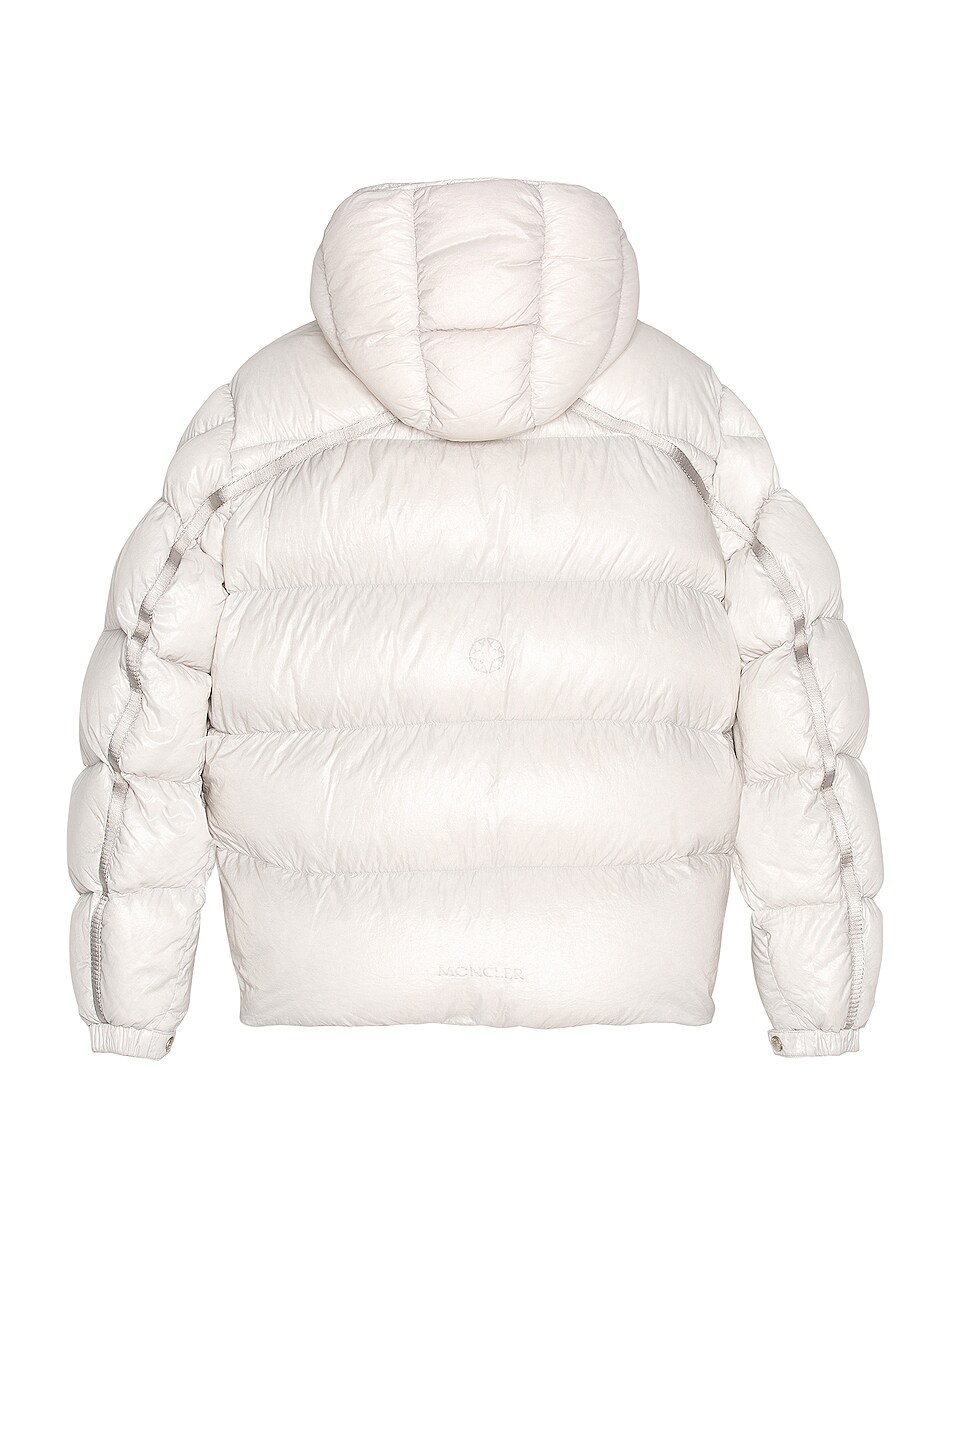 Moncler Genius Moncler Alyx Hooded Forest Jacket in Silver | FWRD